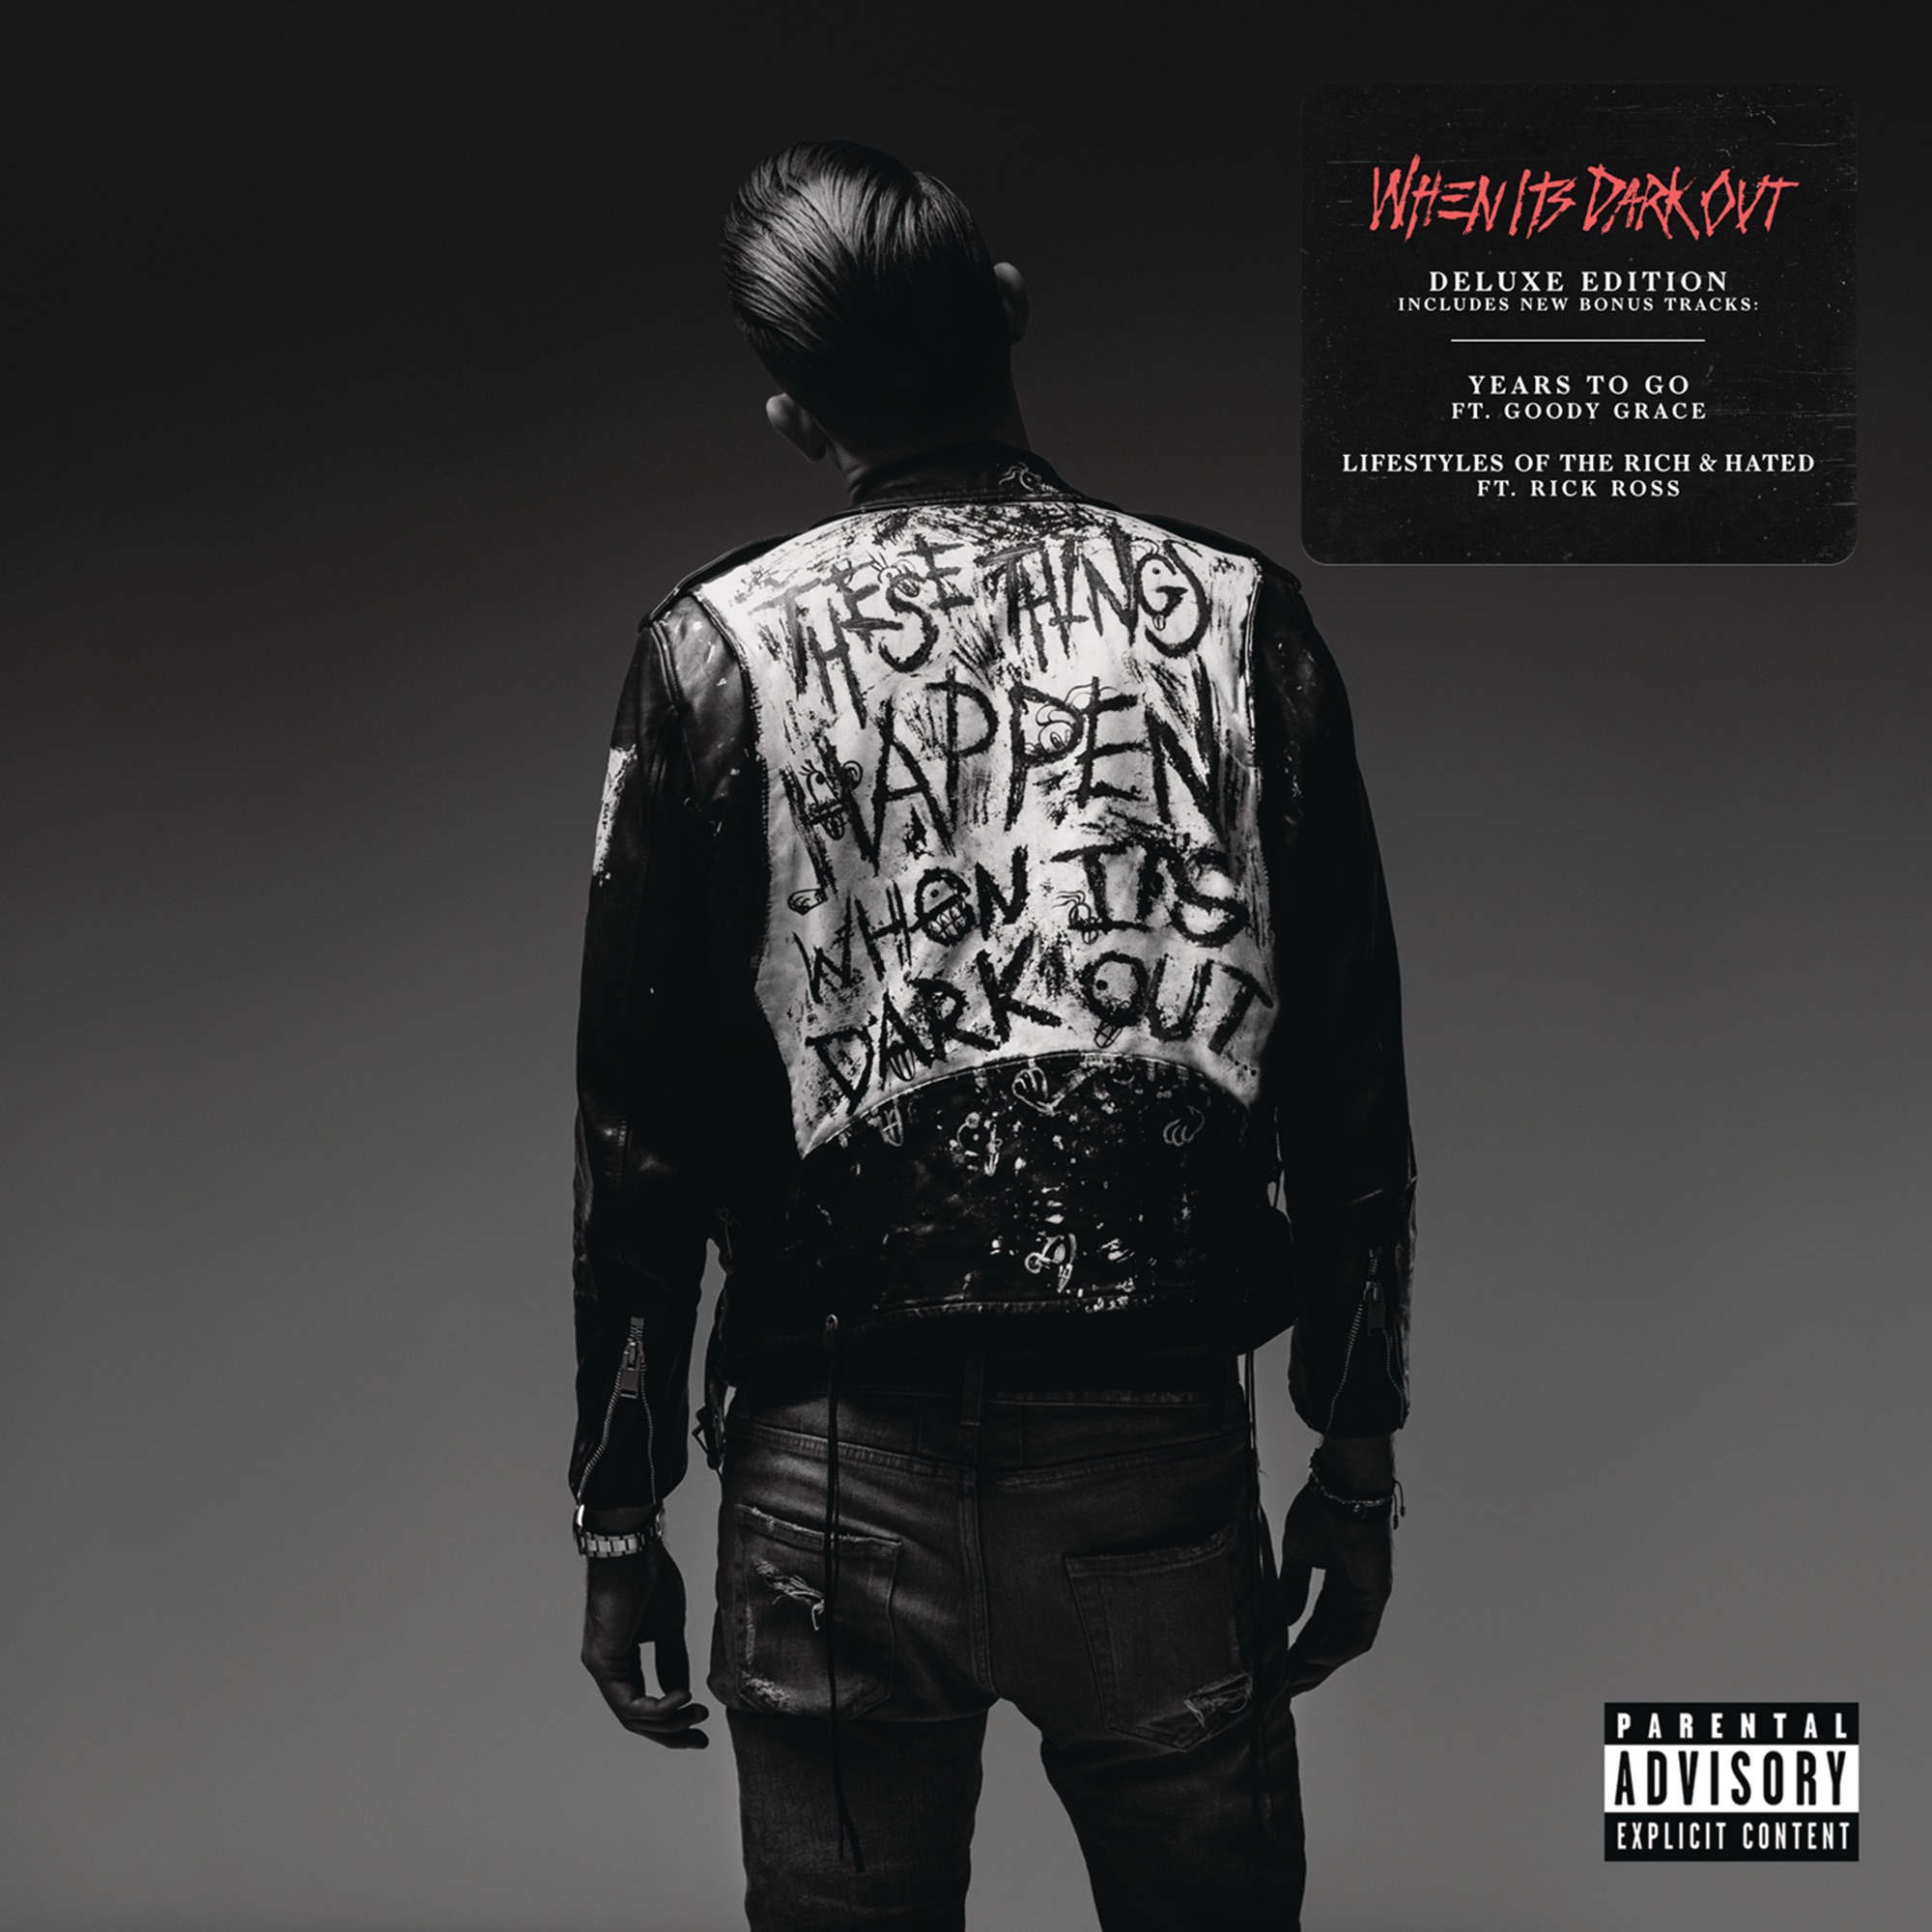 G-Eazy - Lifestyles of the Rich & Hated (feat. Rick Ross) - Single